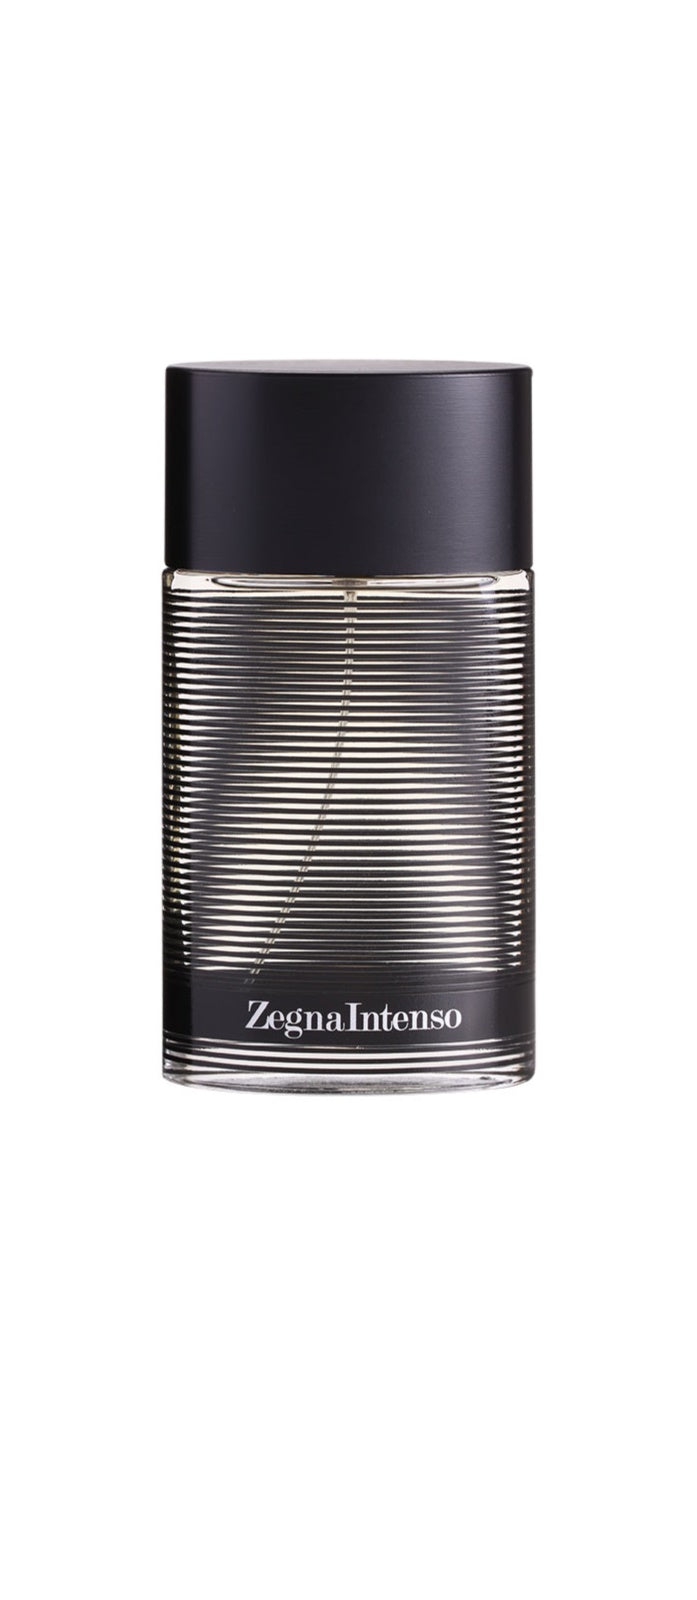 Zegna Intenso EDT - Perfume Planet 